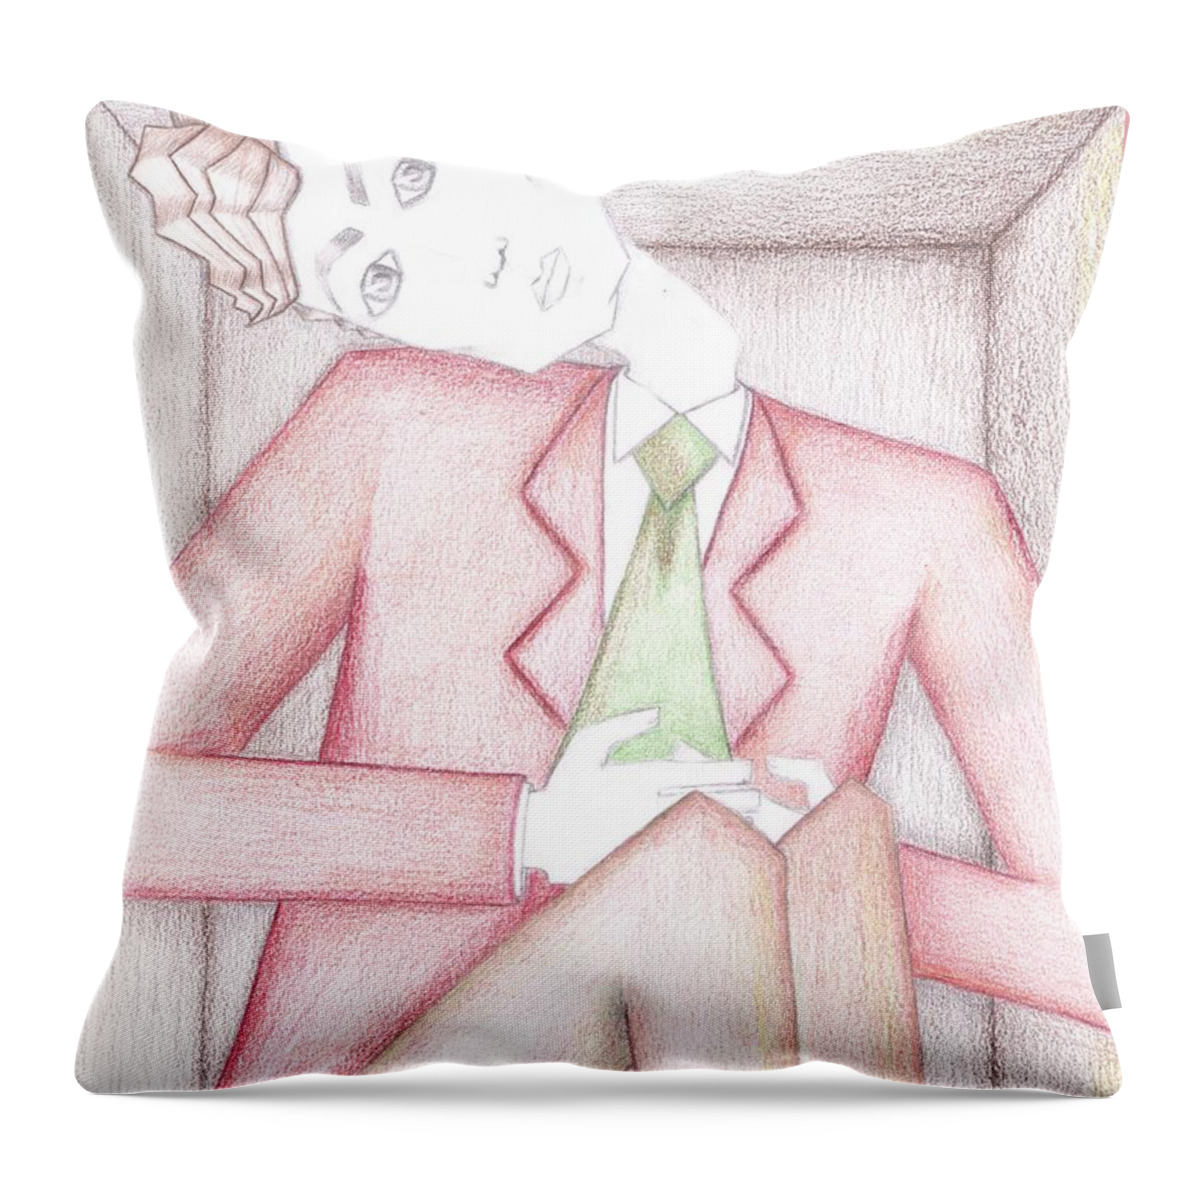 Portrait Throw Pillow featuring the drawing Confined by Megan Stone